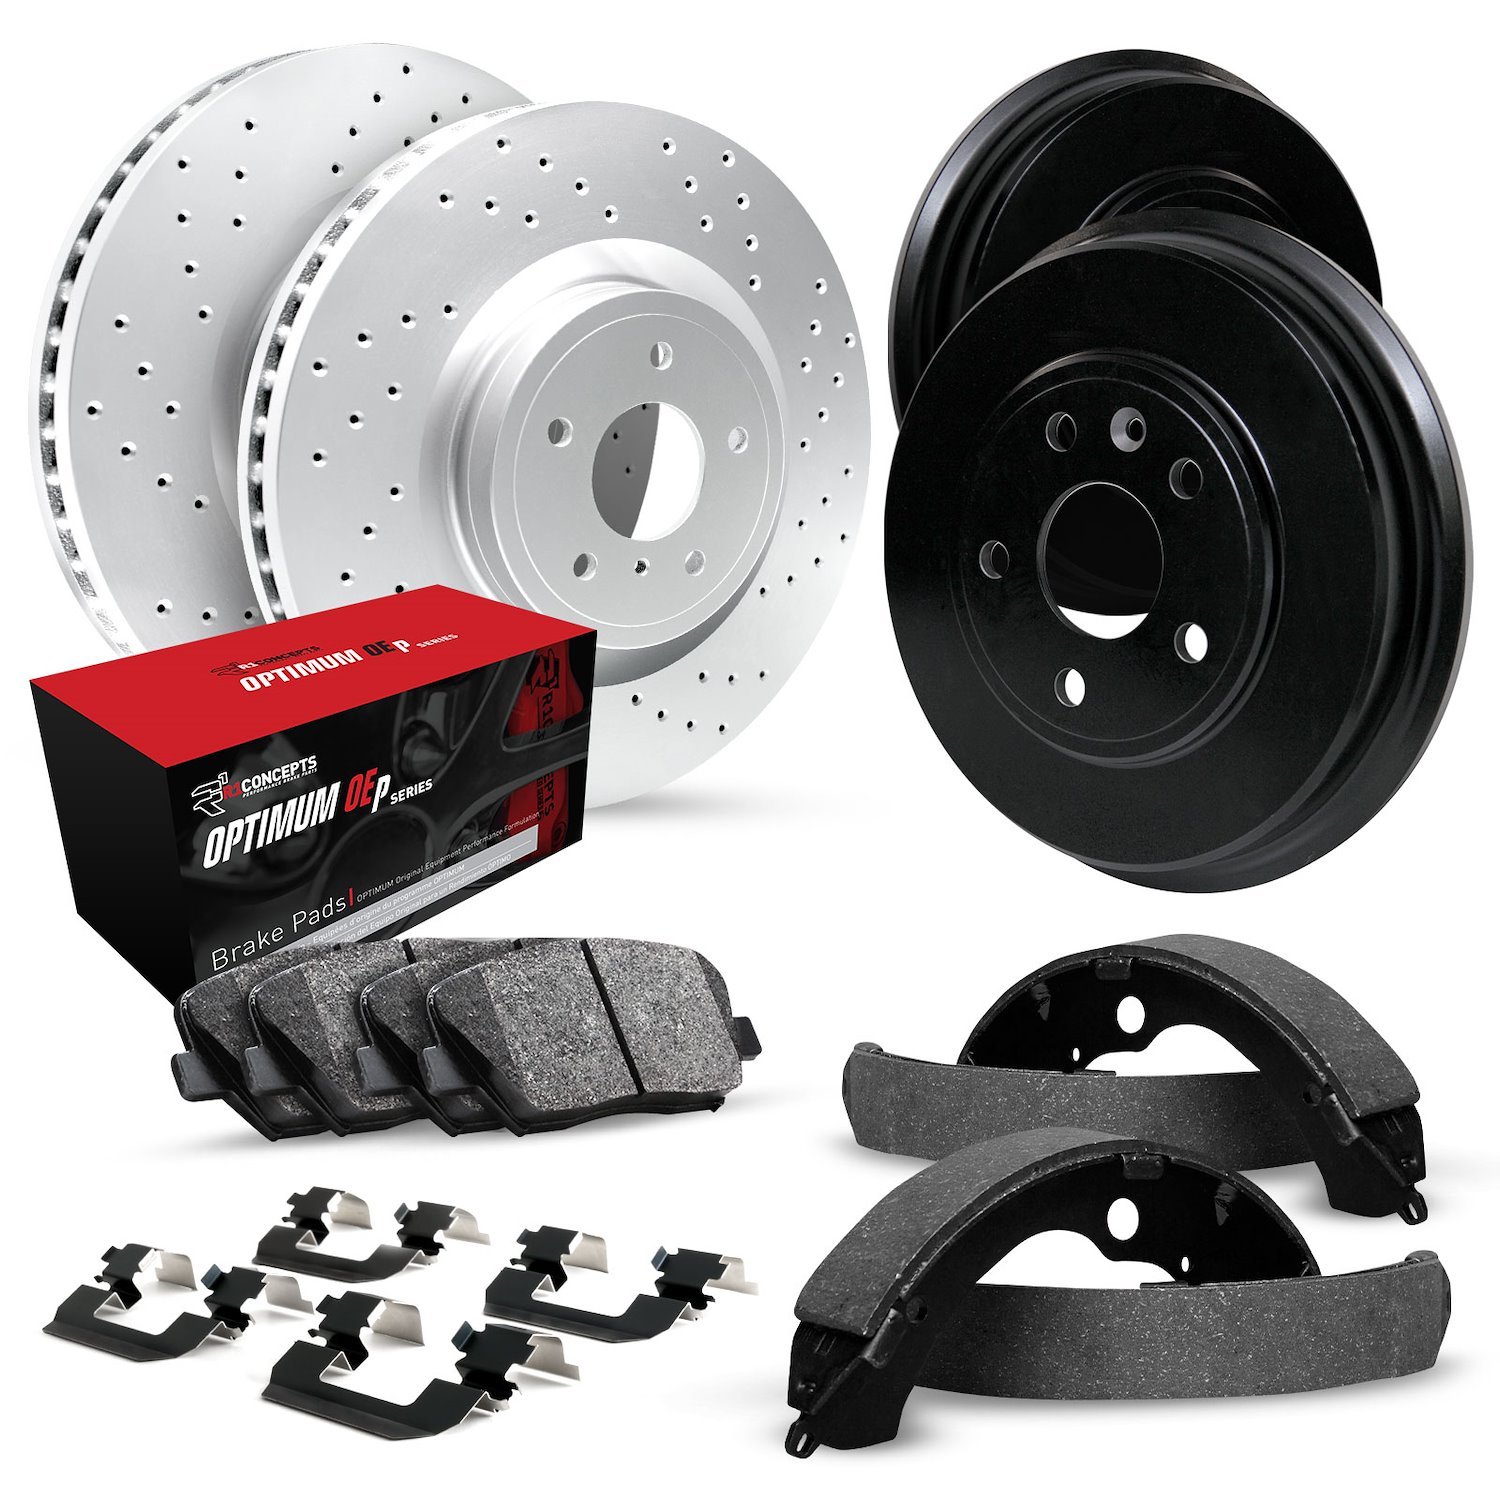 GEO-Carbon Drilled Brake Rotor & Drum Set w/Optimum OE Pads, Shoes, & Hardware, 1972-1982 GM, Position: Front & Rear